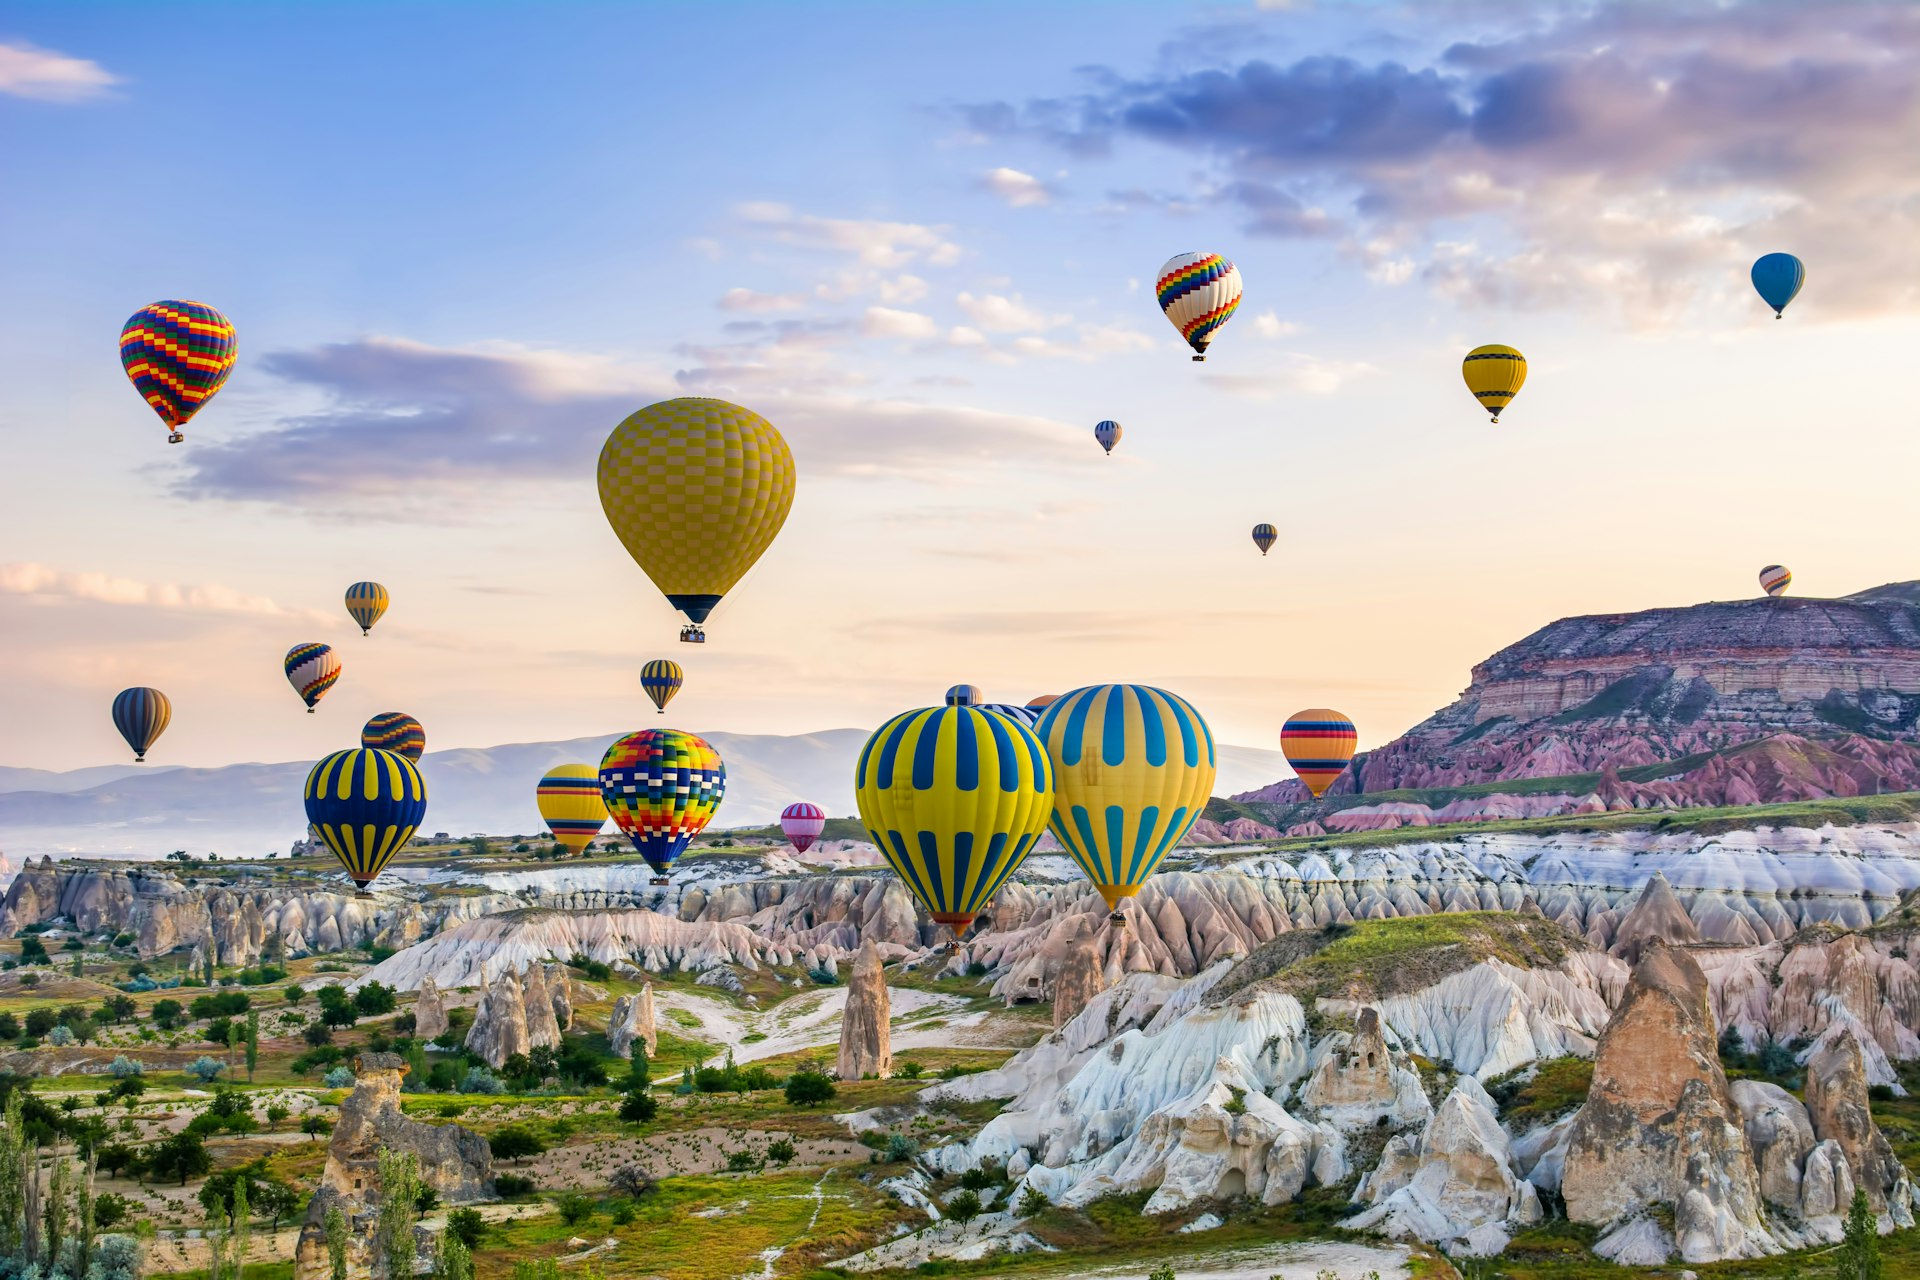 Balloons floating over a rocky landscape at Goreme, Cappadocia